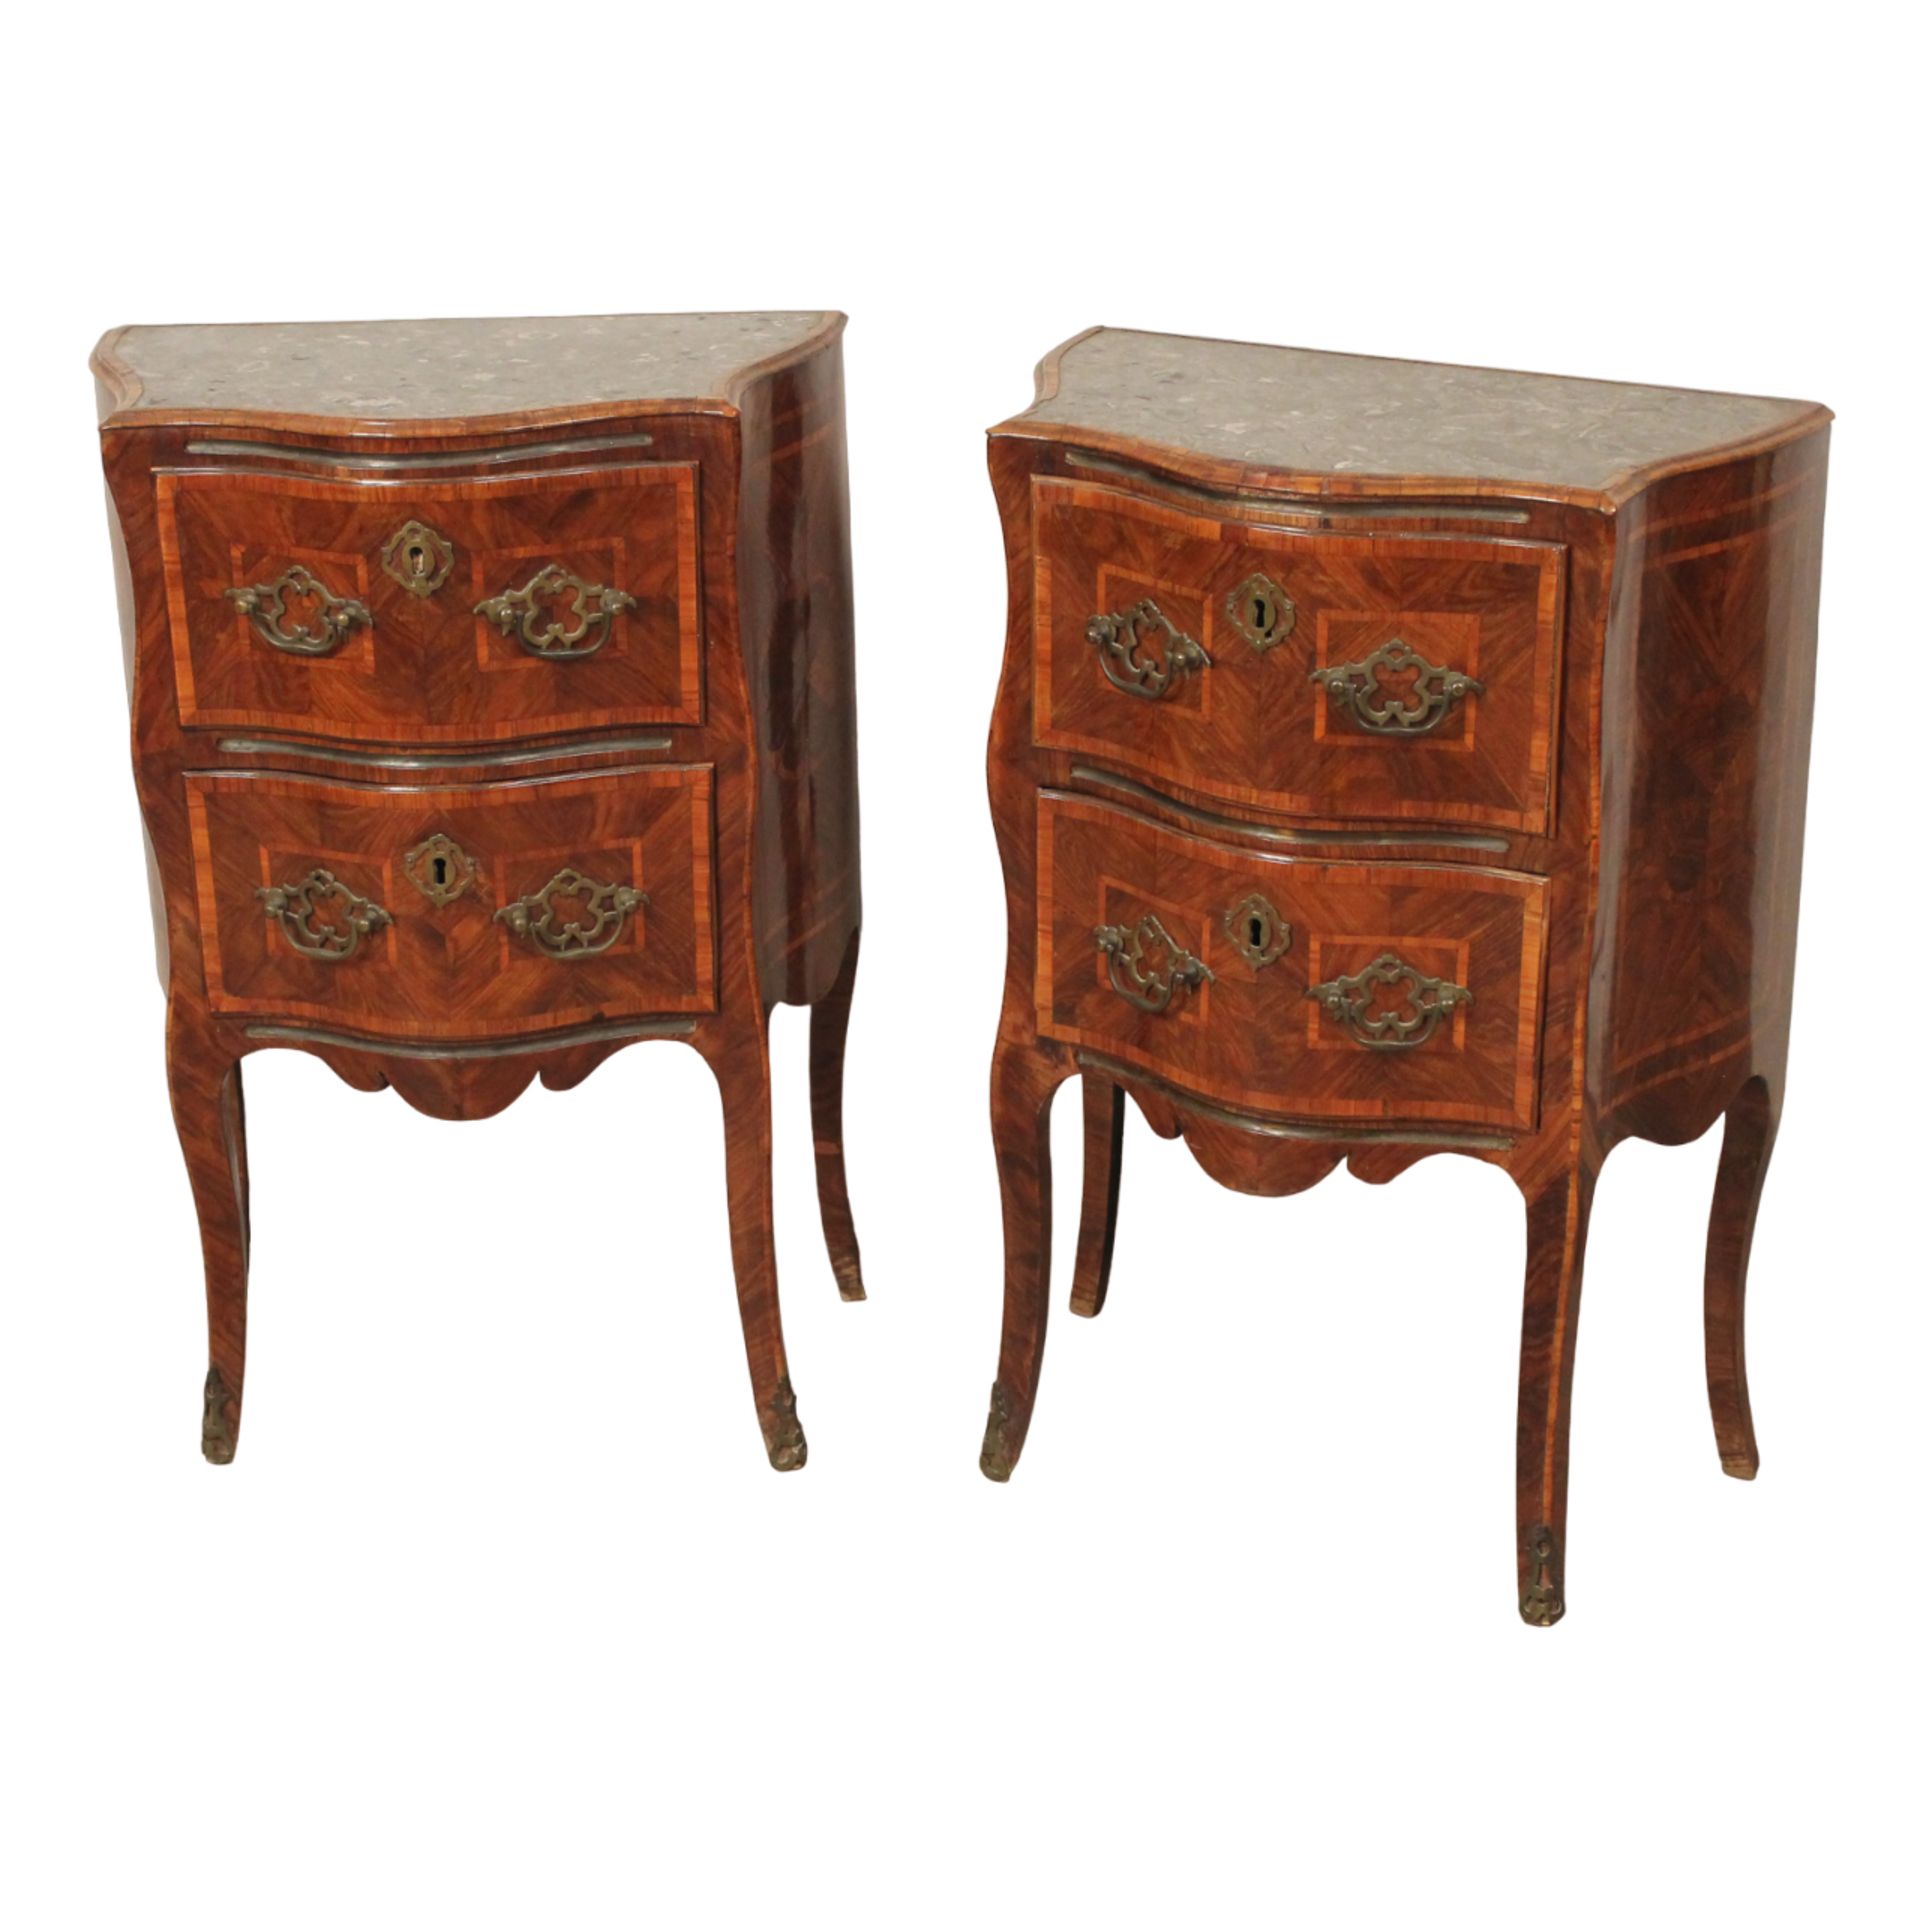 Coppia comodini - Pair of bedside tables - Image 2 of 3